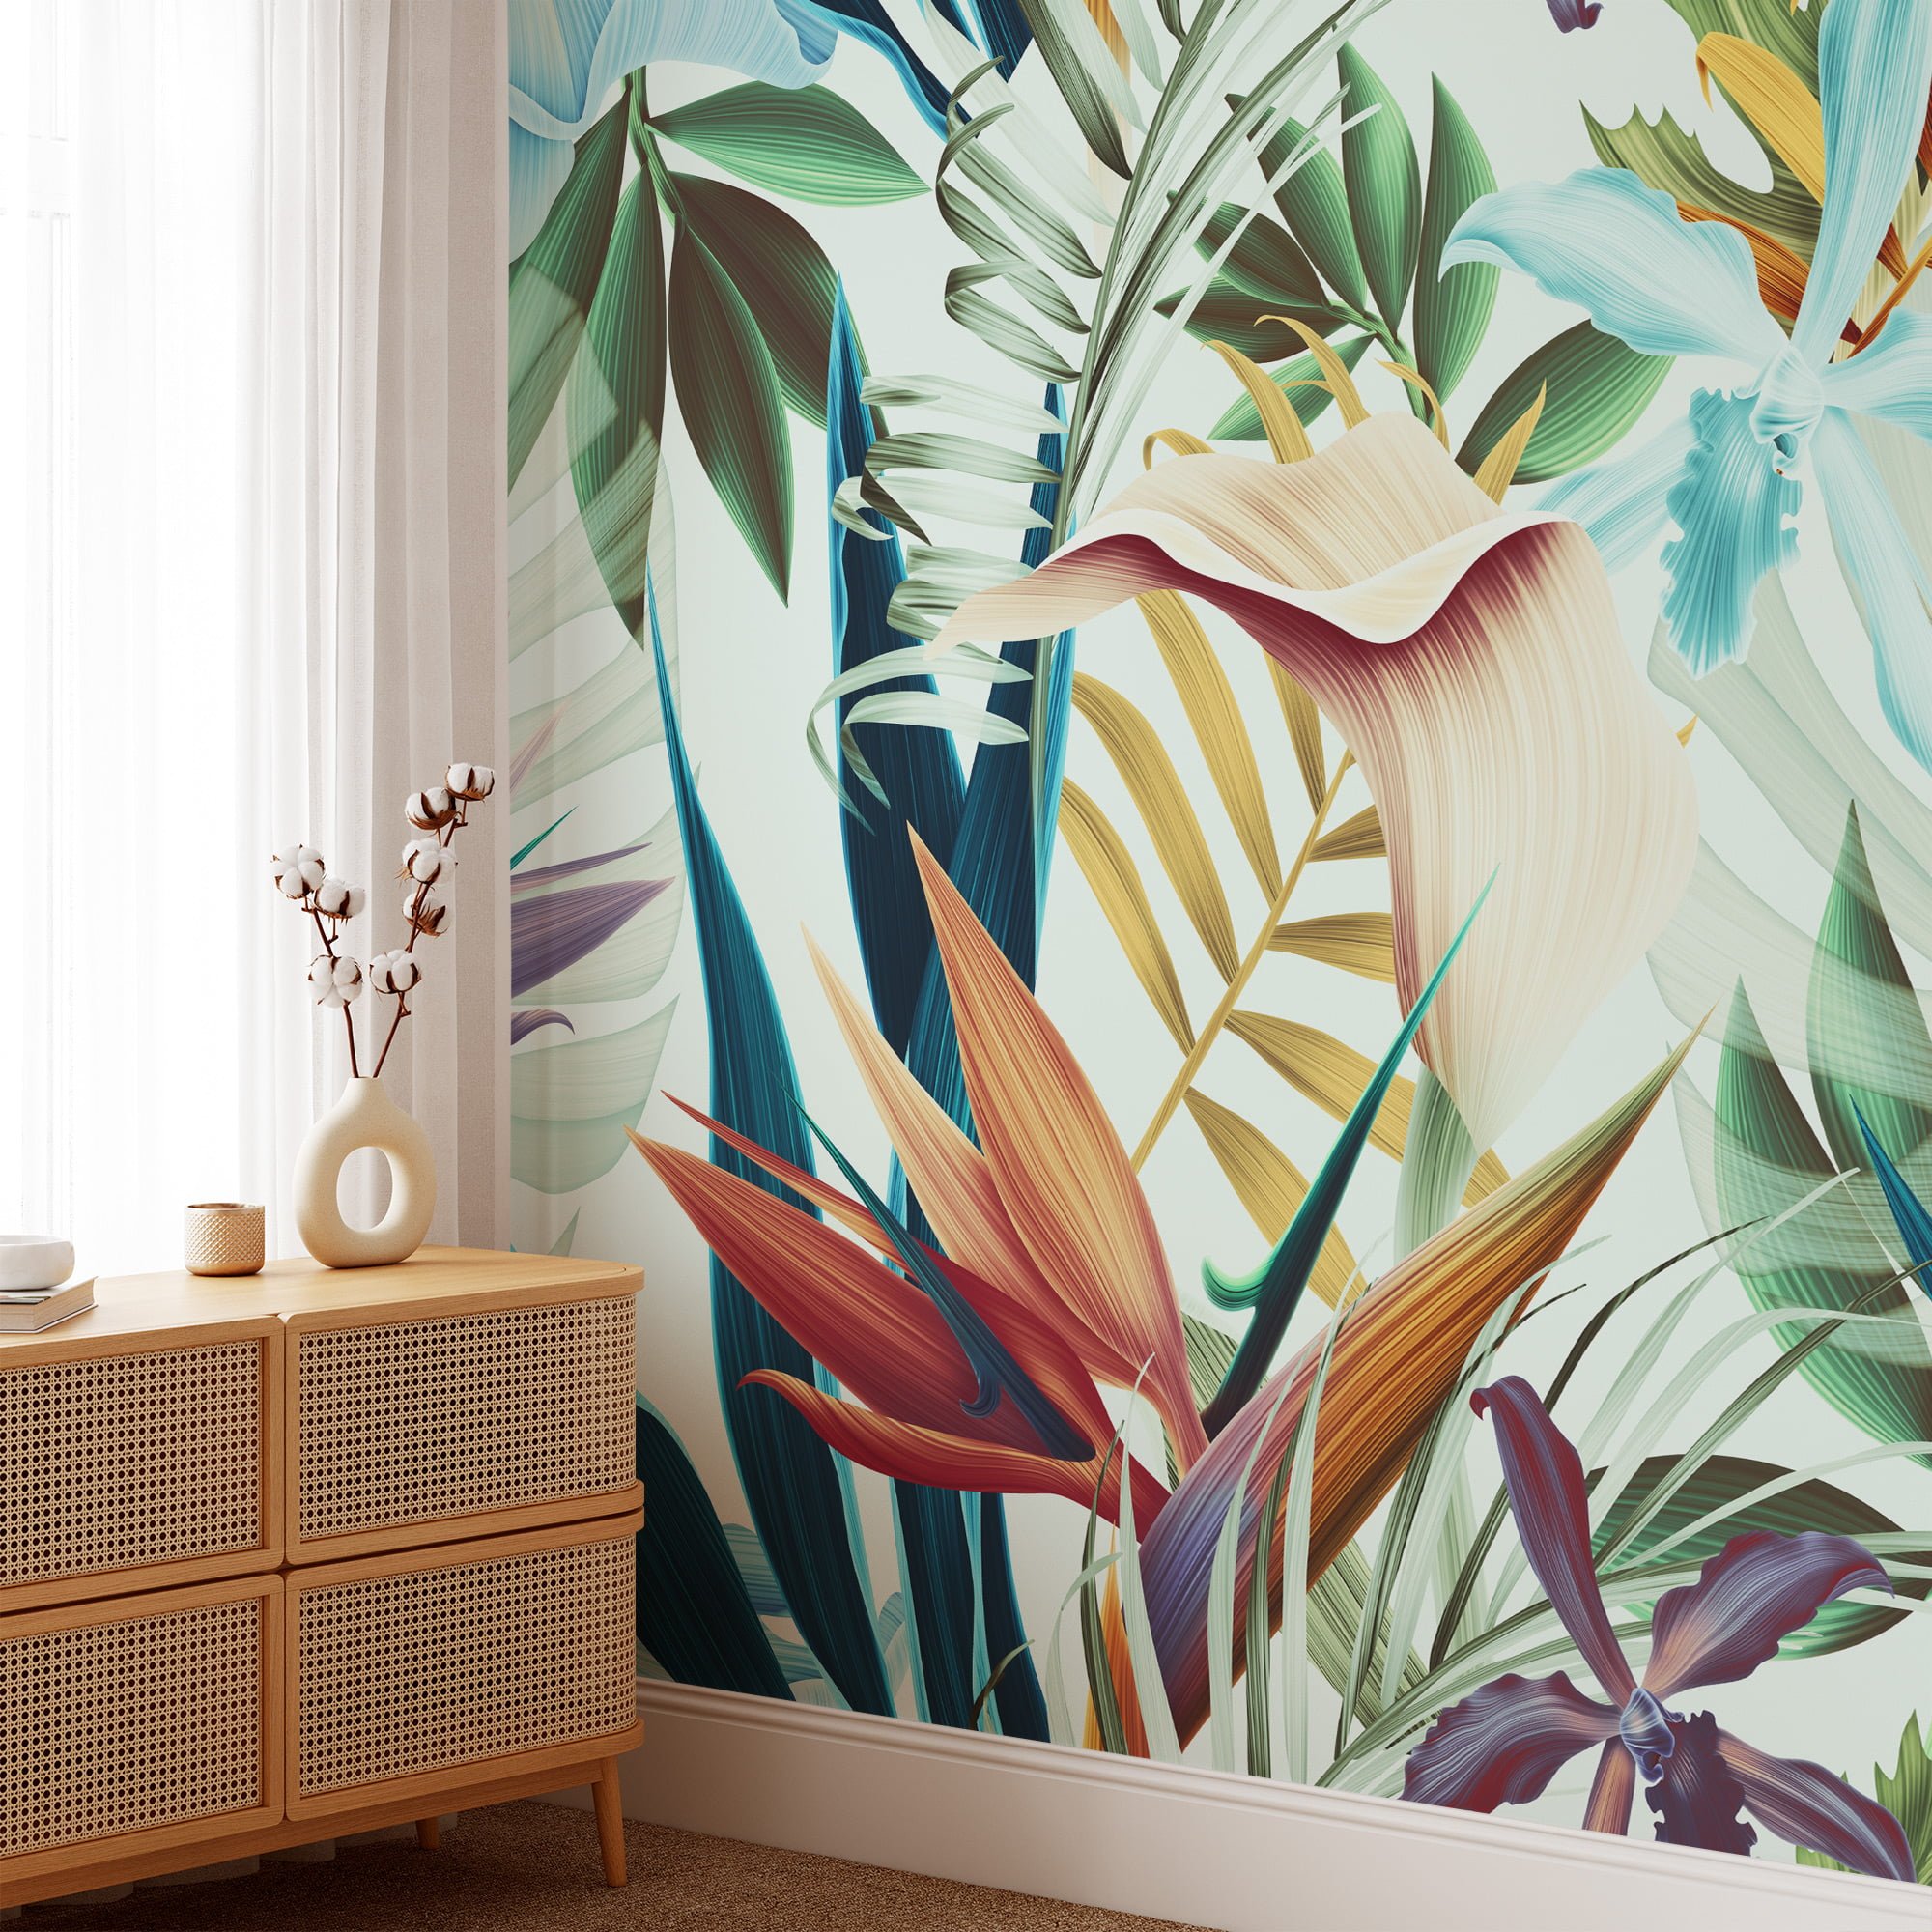 Large Tropical Floral Wallpaper, Exotic and Lush Peel and Stick Removable  Wall Mural, Self Adhesive Wallpaper for a Relaxing Oasis